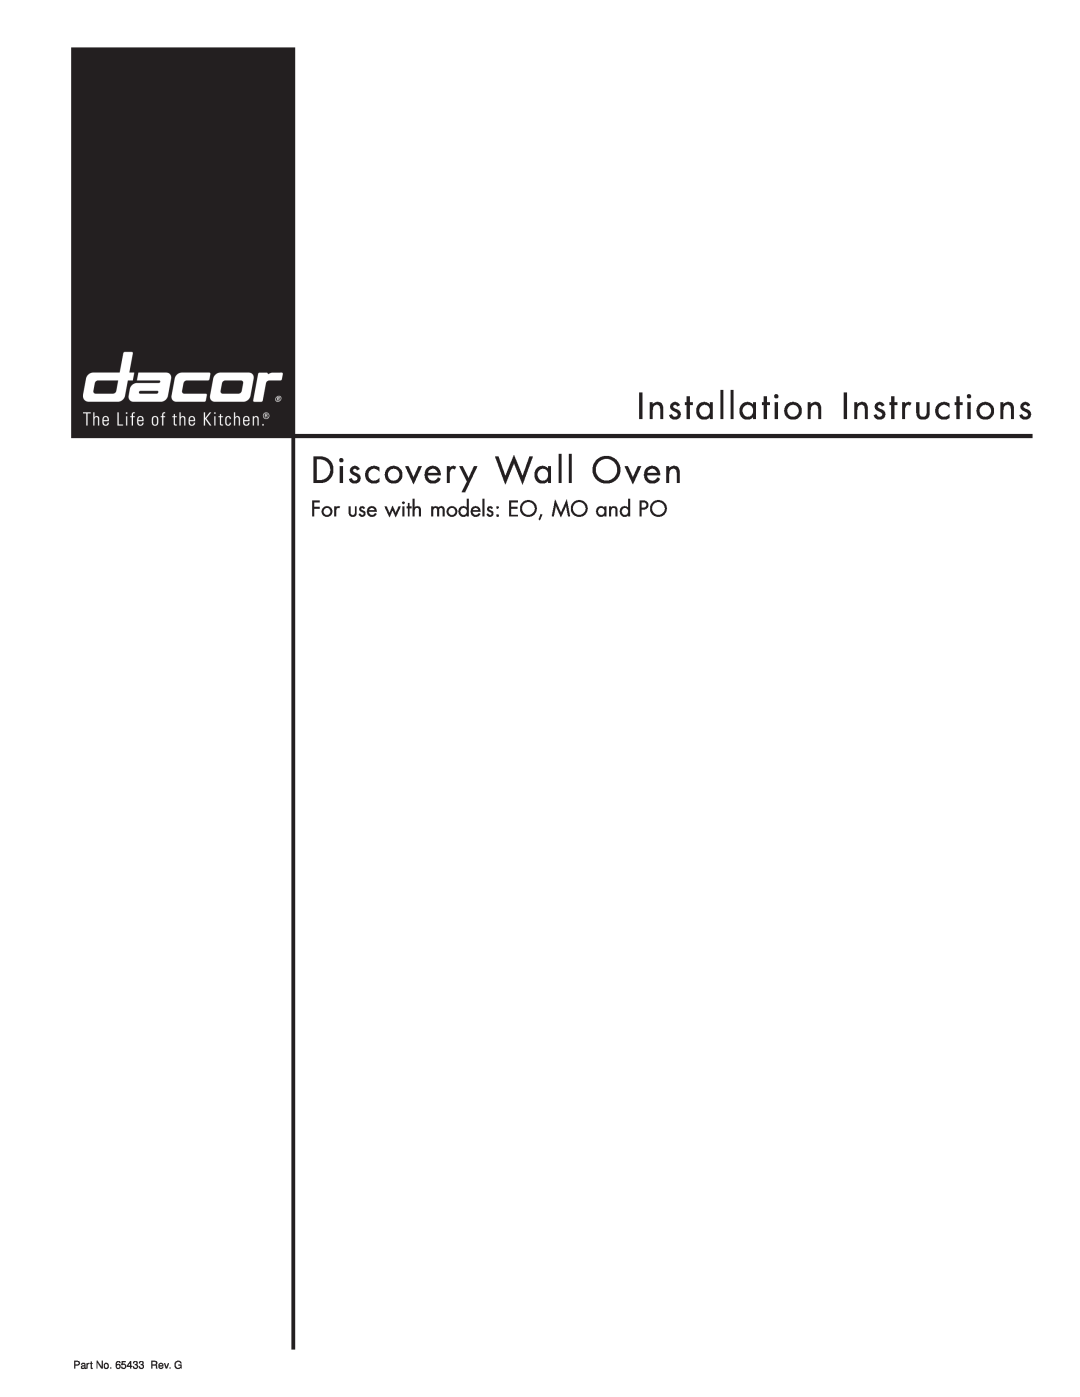 Dacor manual For use with models EO, MO and PO, Installation Instructions Discovery Wall Oven, Only, Review Date 